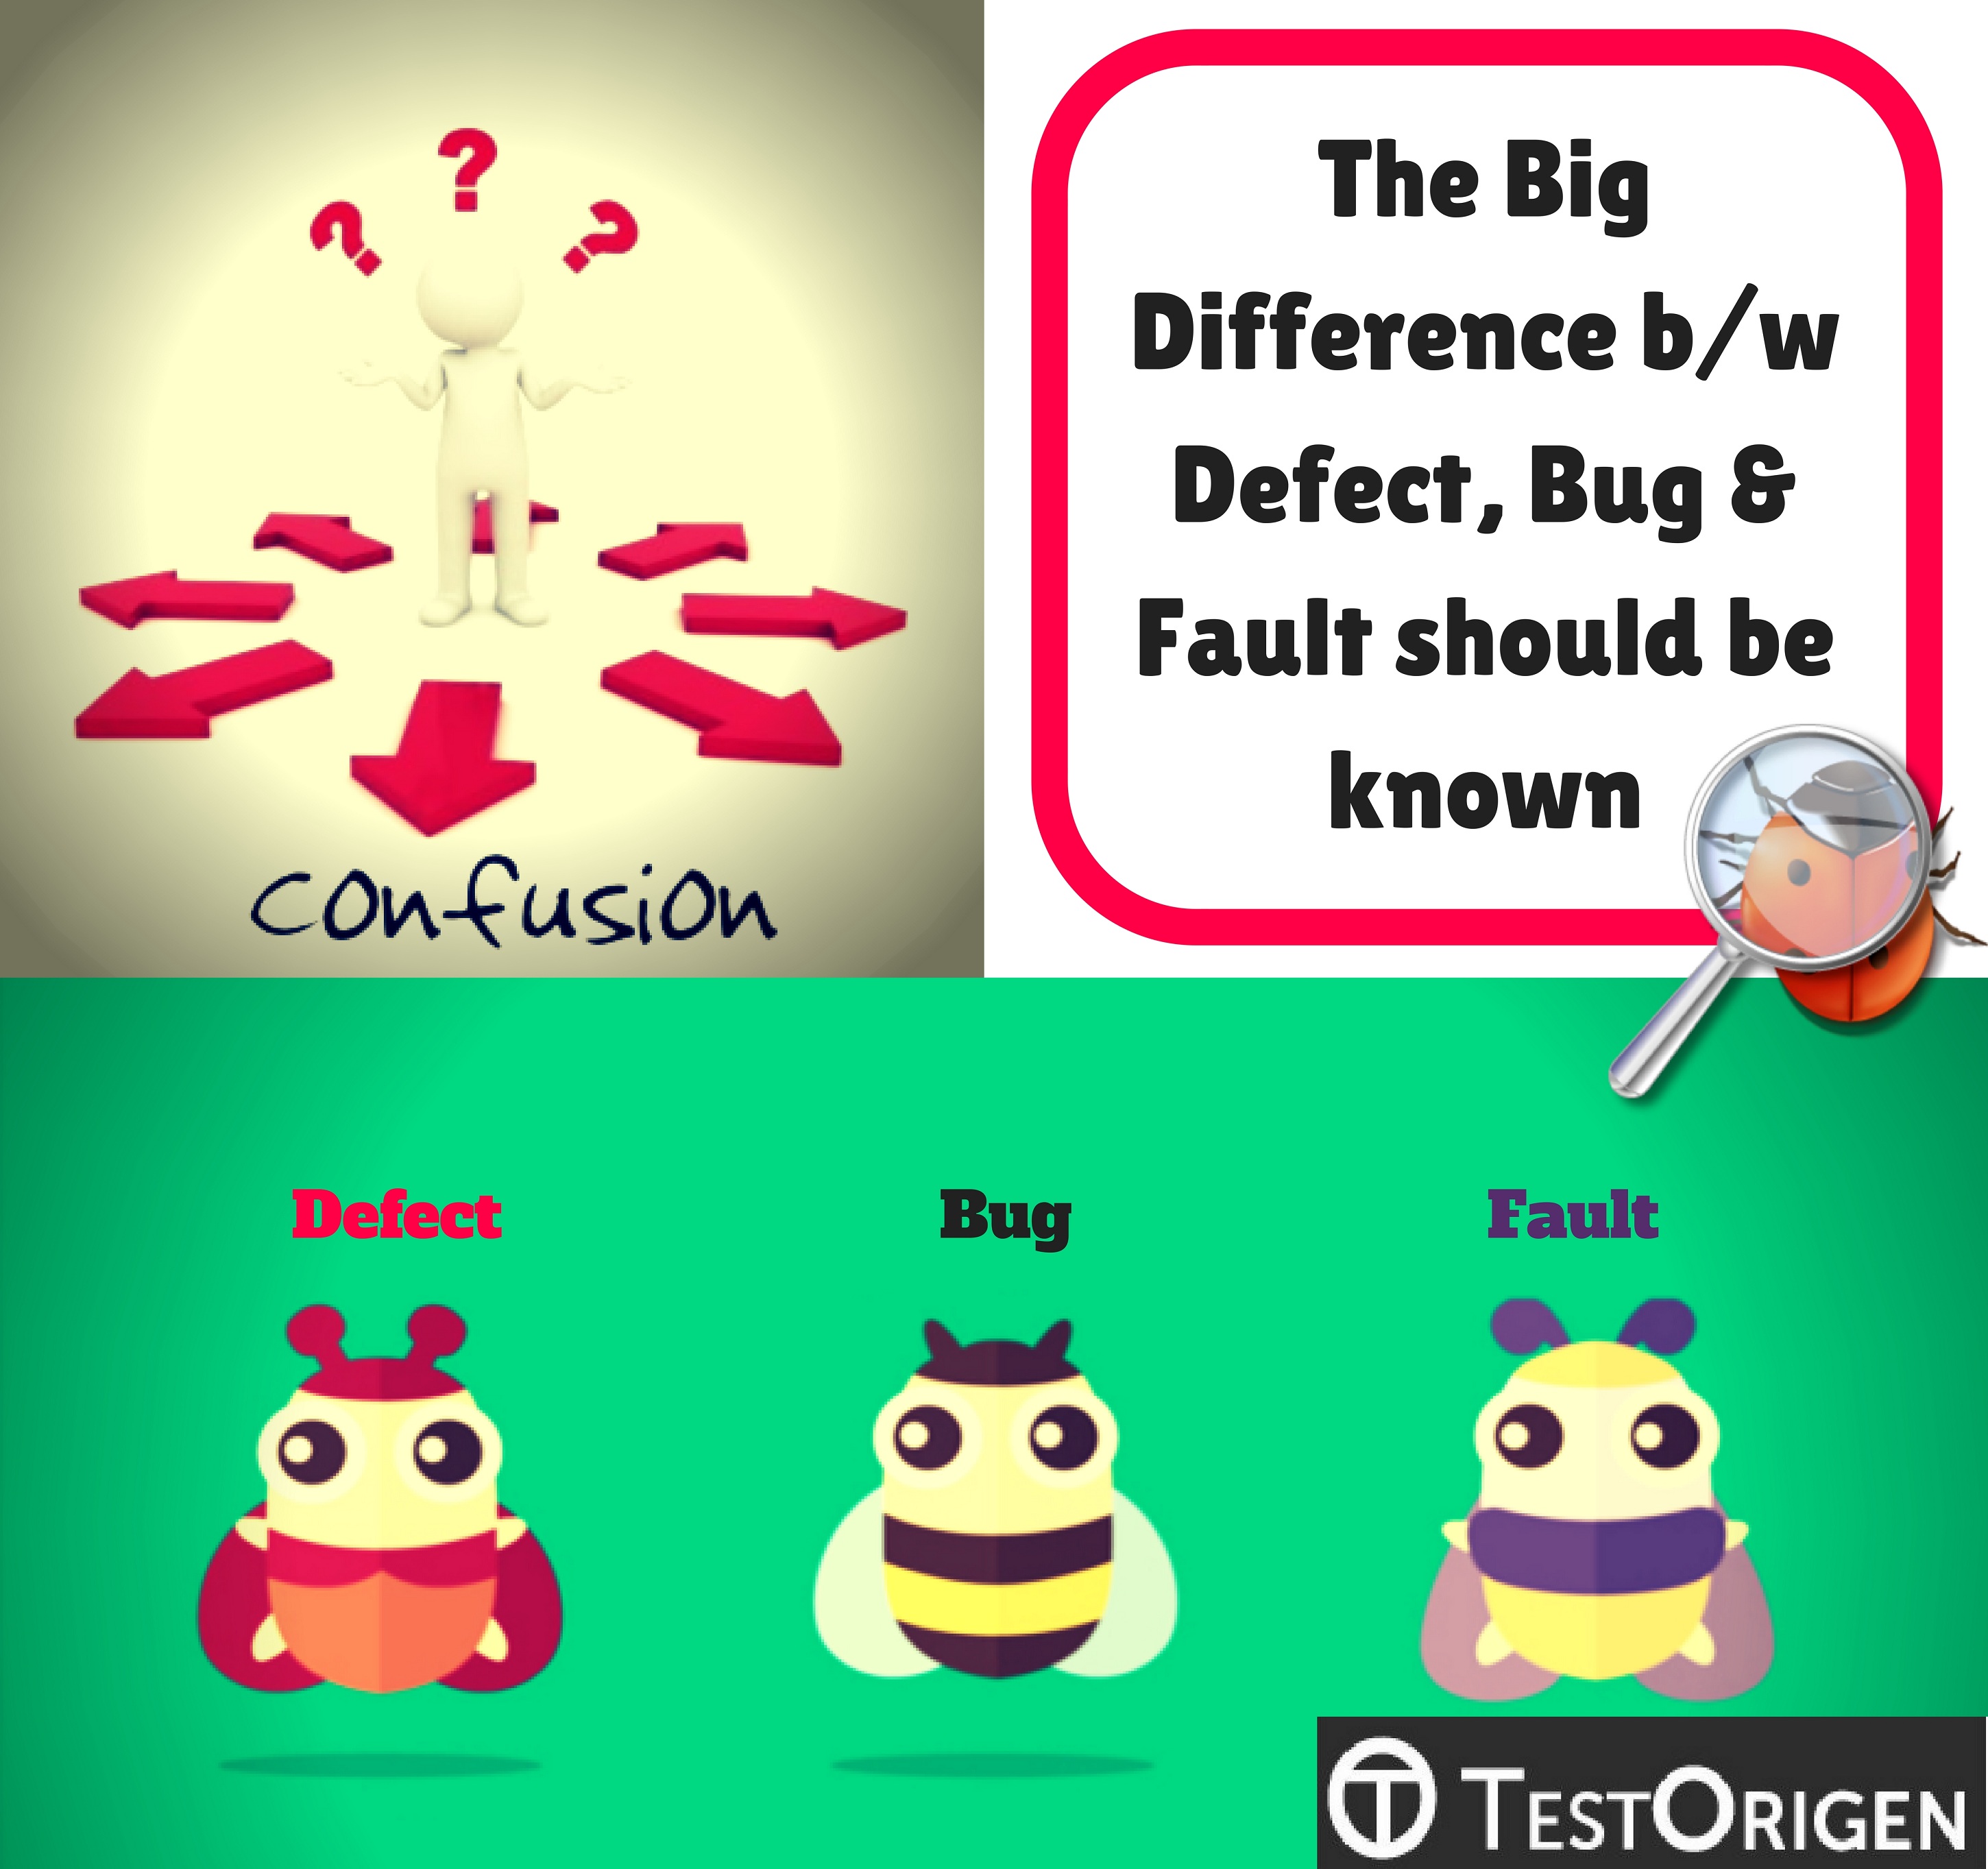 The Big Difference b/w Defect, Bug & Fault should be known